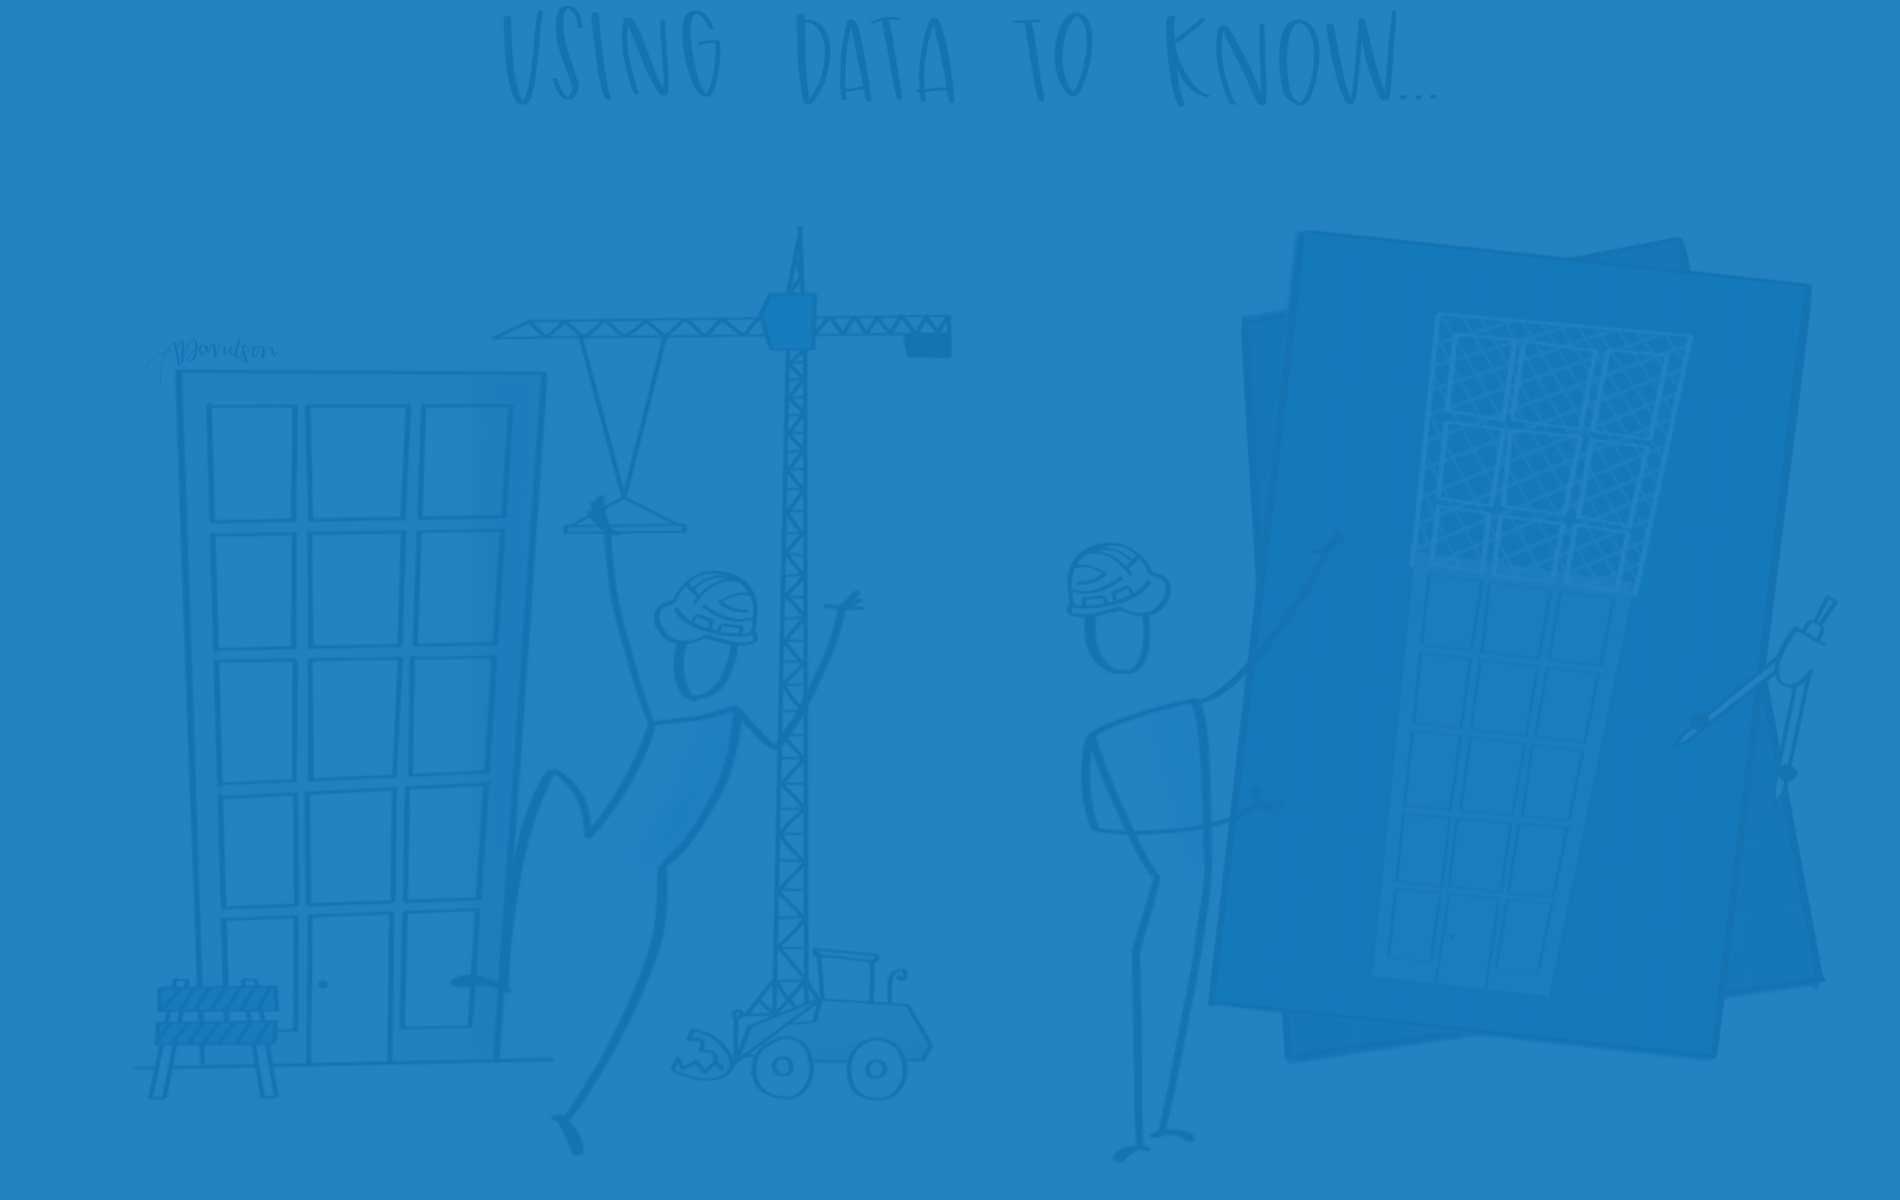 What Does It Mean to Be Data-Driven?